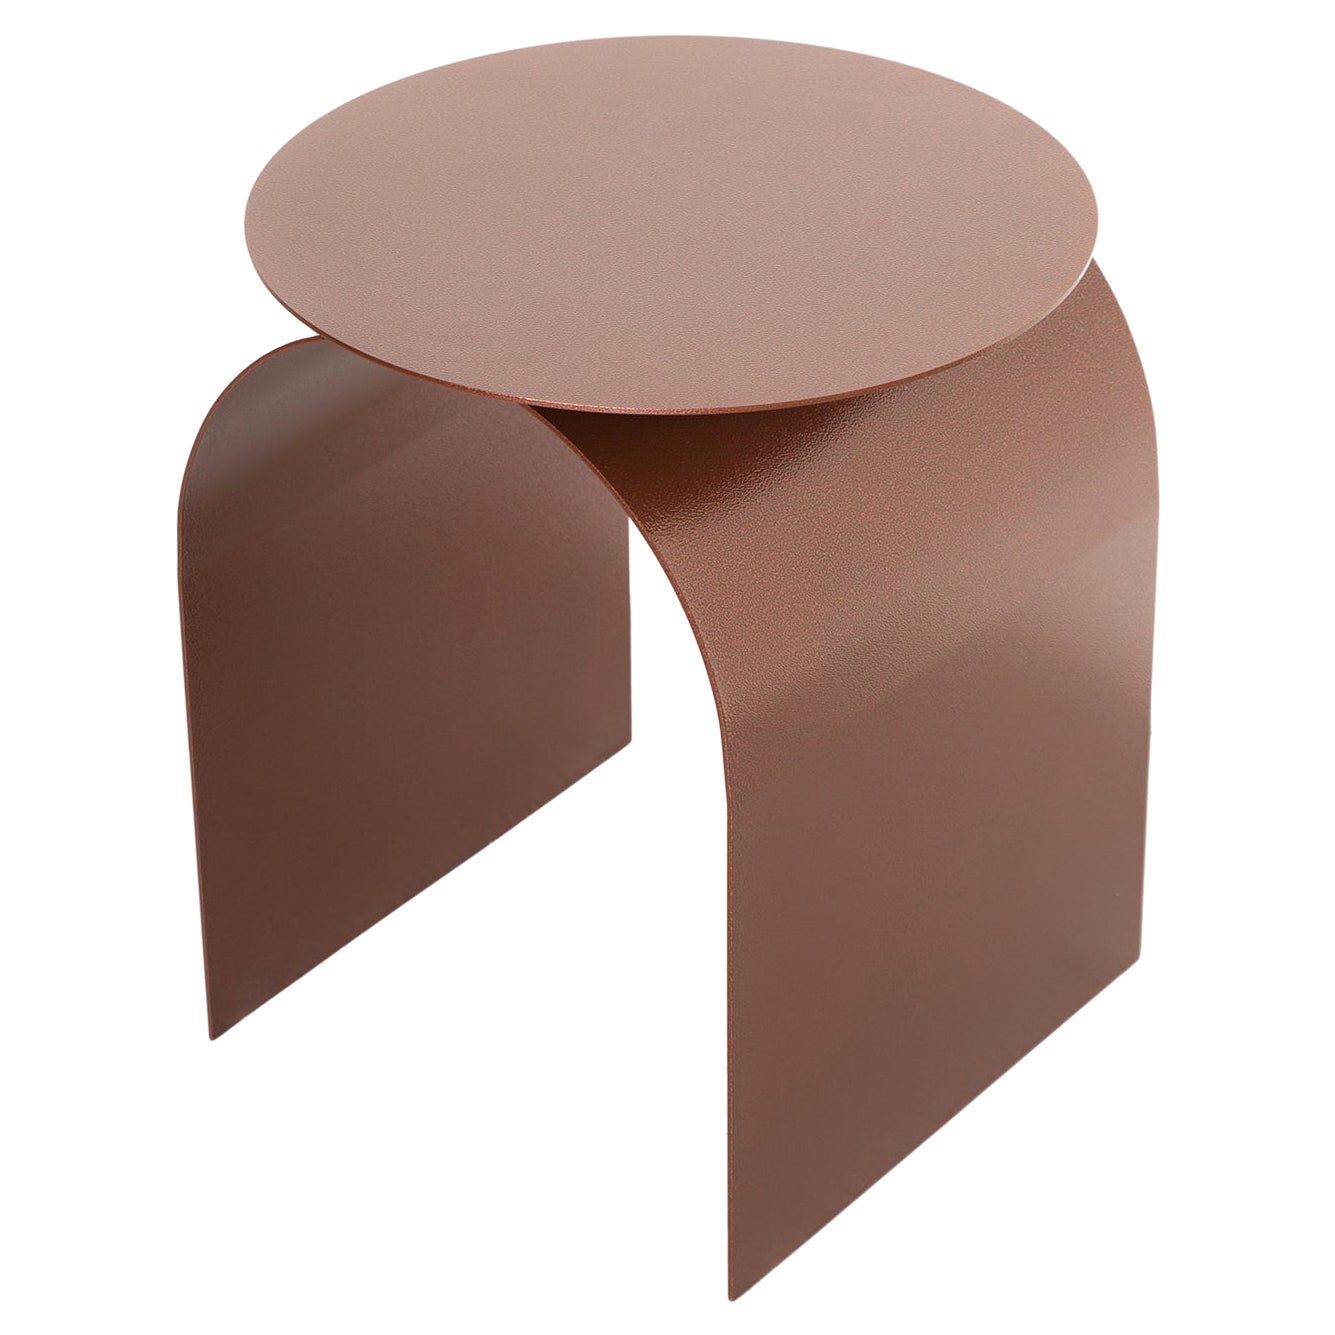 Contemporary Spinzi Palladium metal side table in Hammered Copper with round top